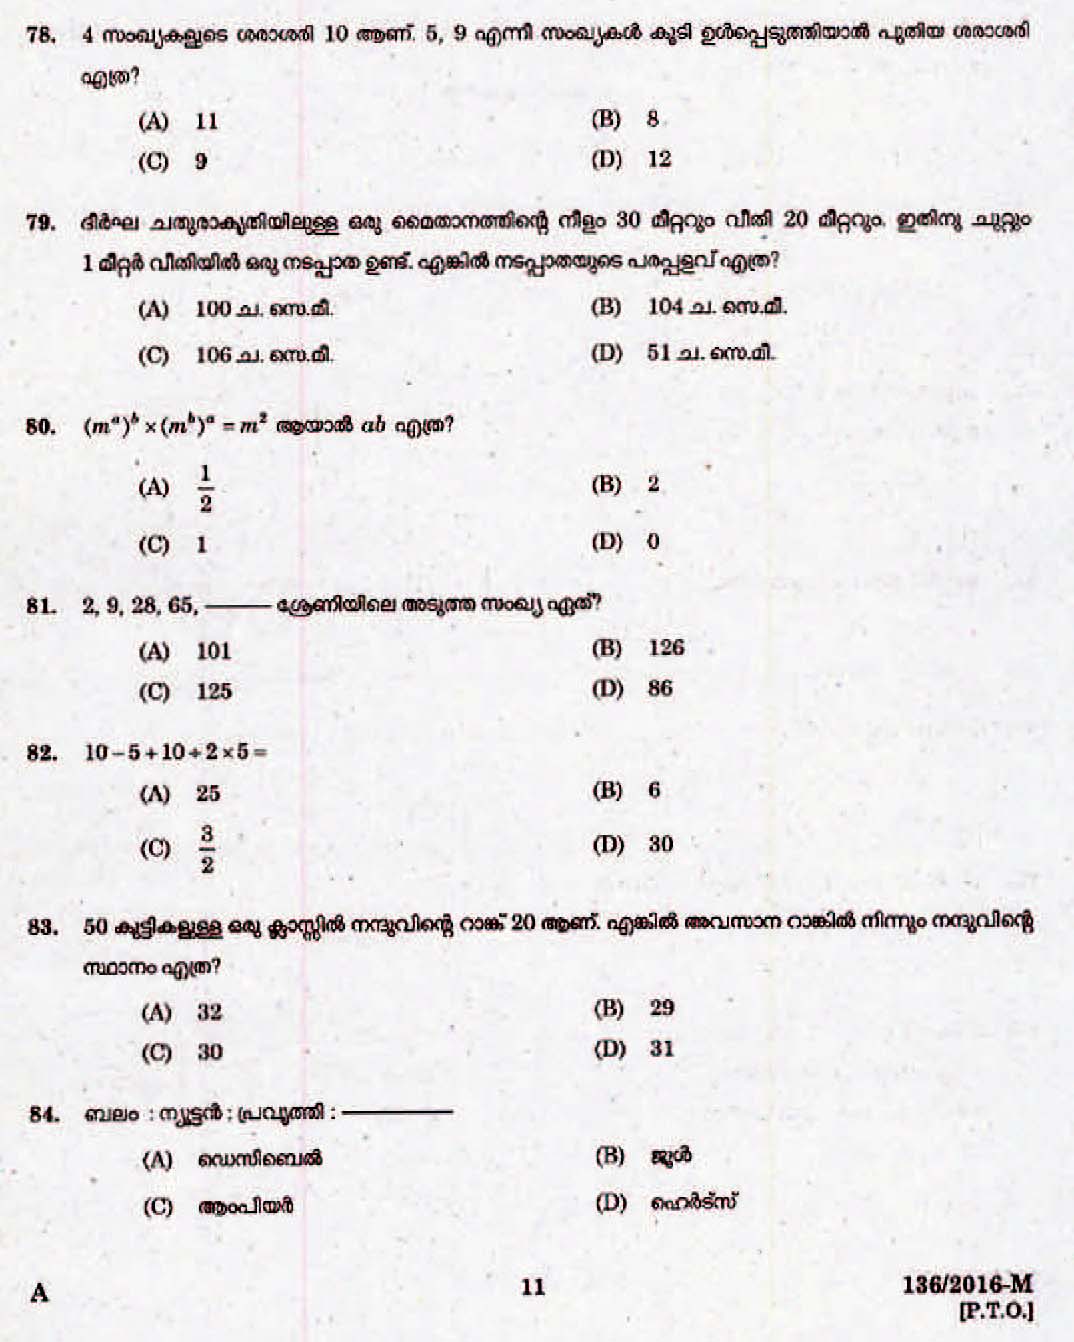 LD Clerk Question Paper Malayalam 2016 Paper Code 1362016 M 9